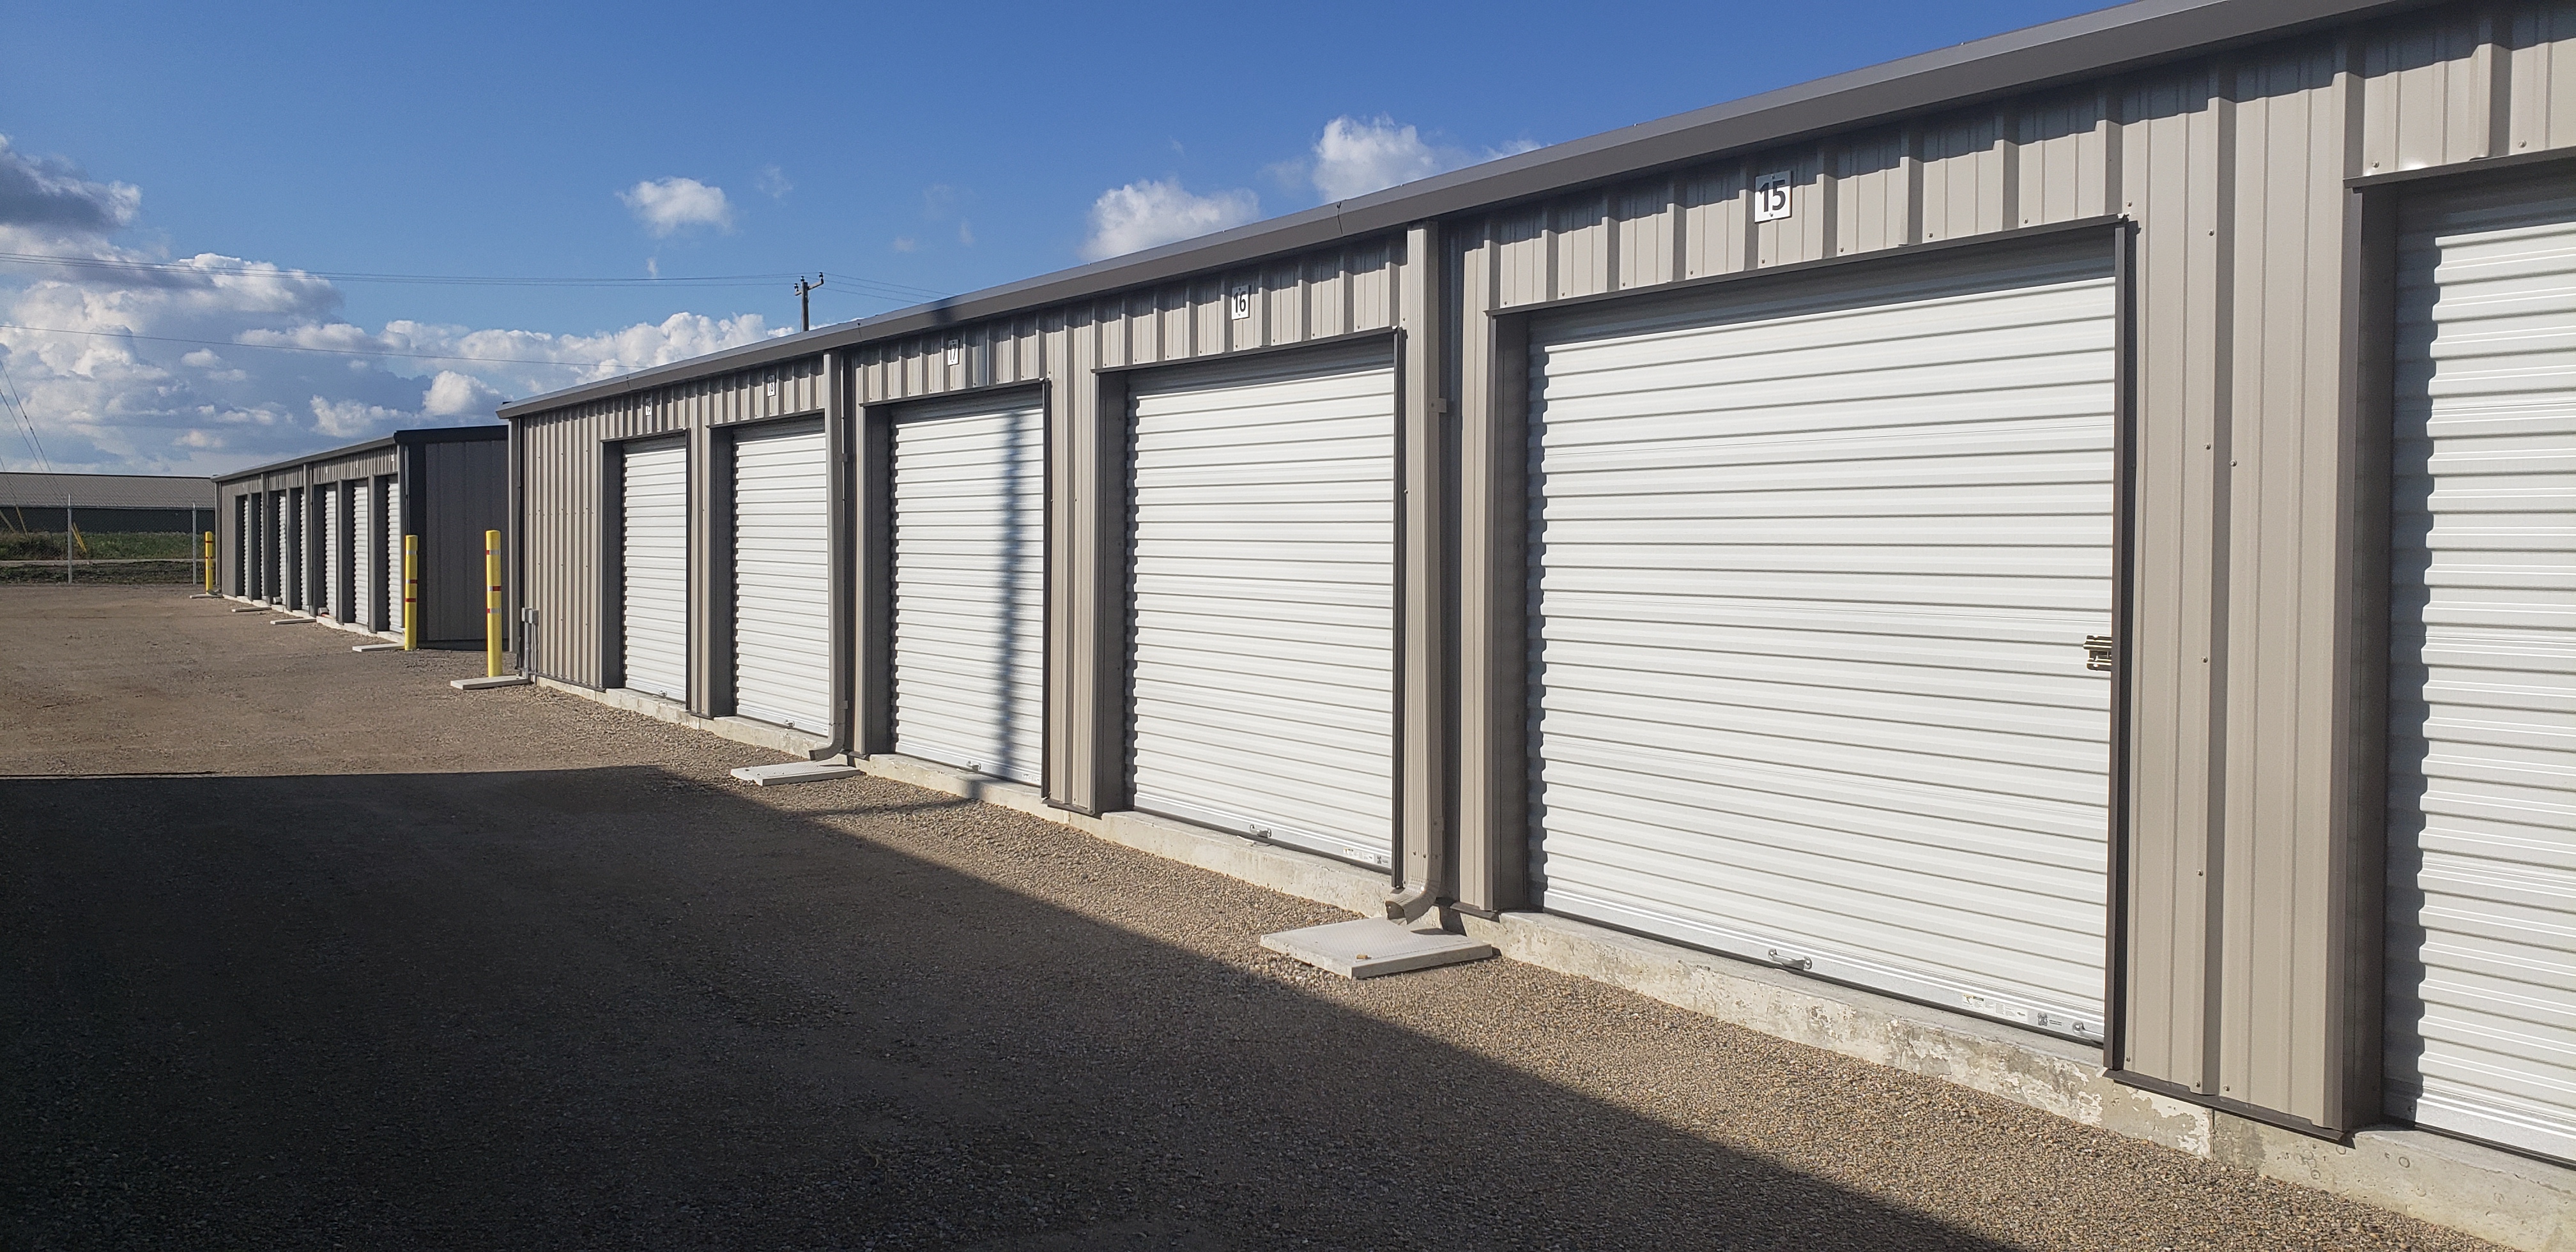 North Perth Storage is your ideal storage solution located in Listowel, ON, Canada. We offer climate-controlled units at affordable rates. Rent a unit online today! 